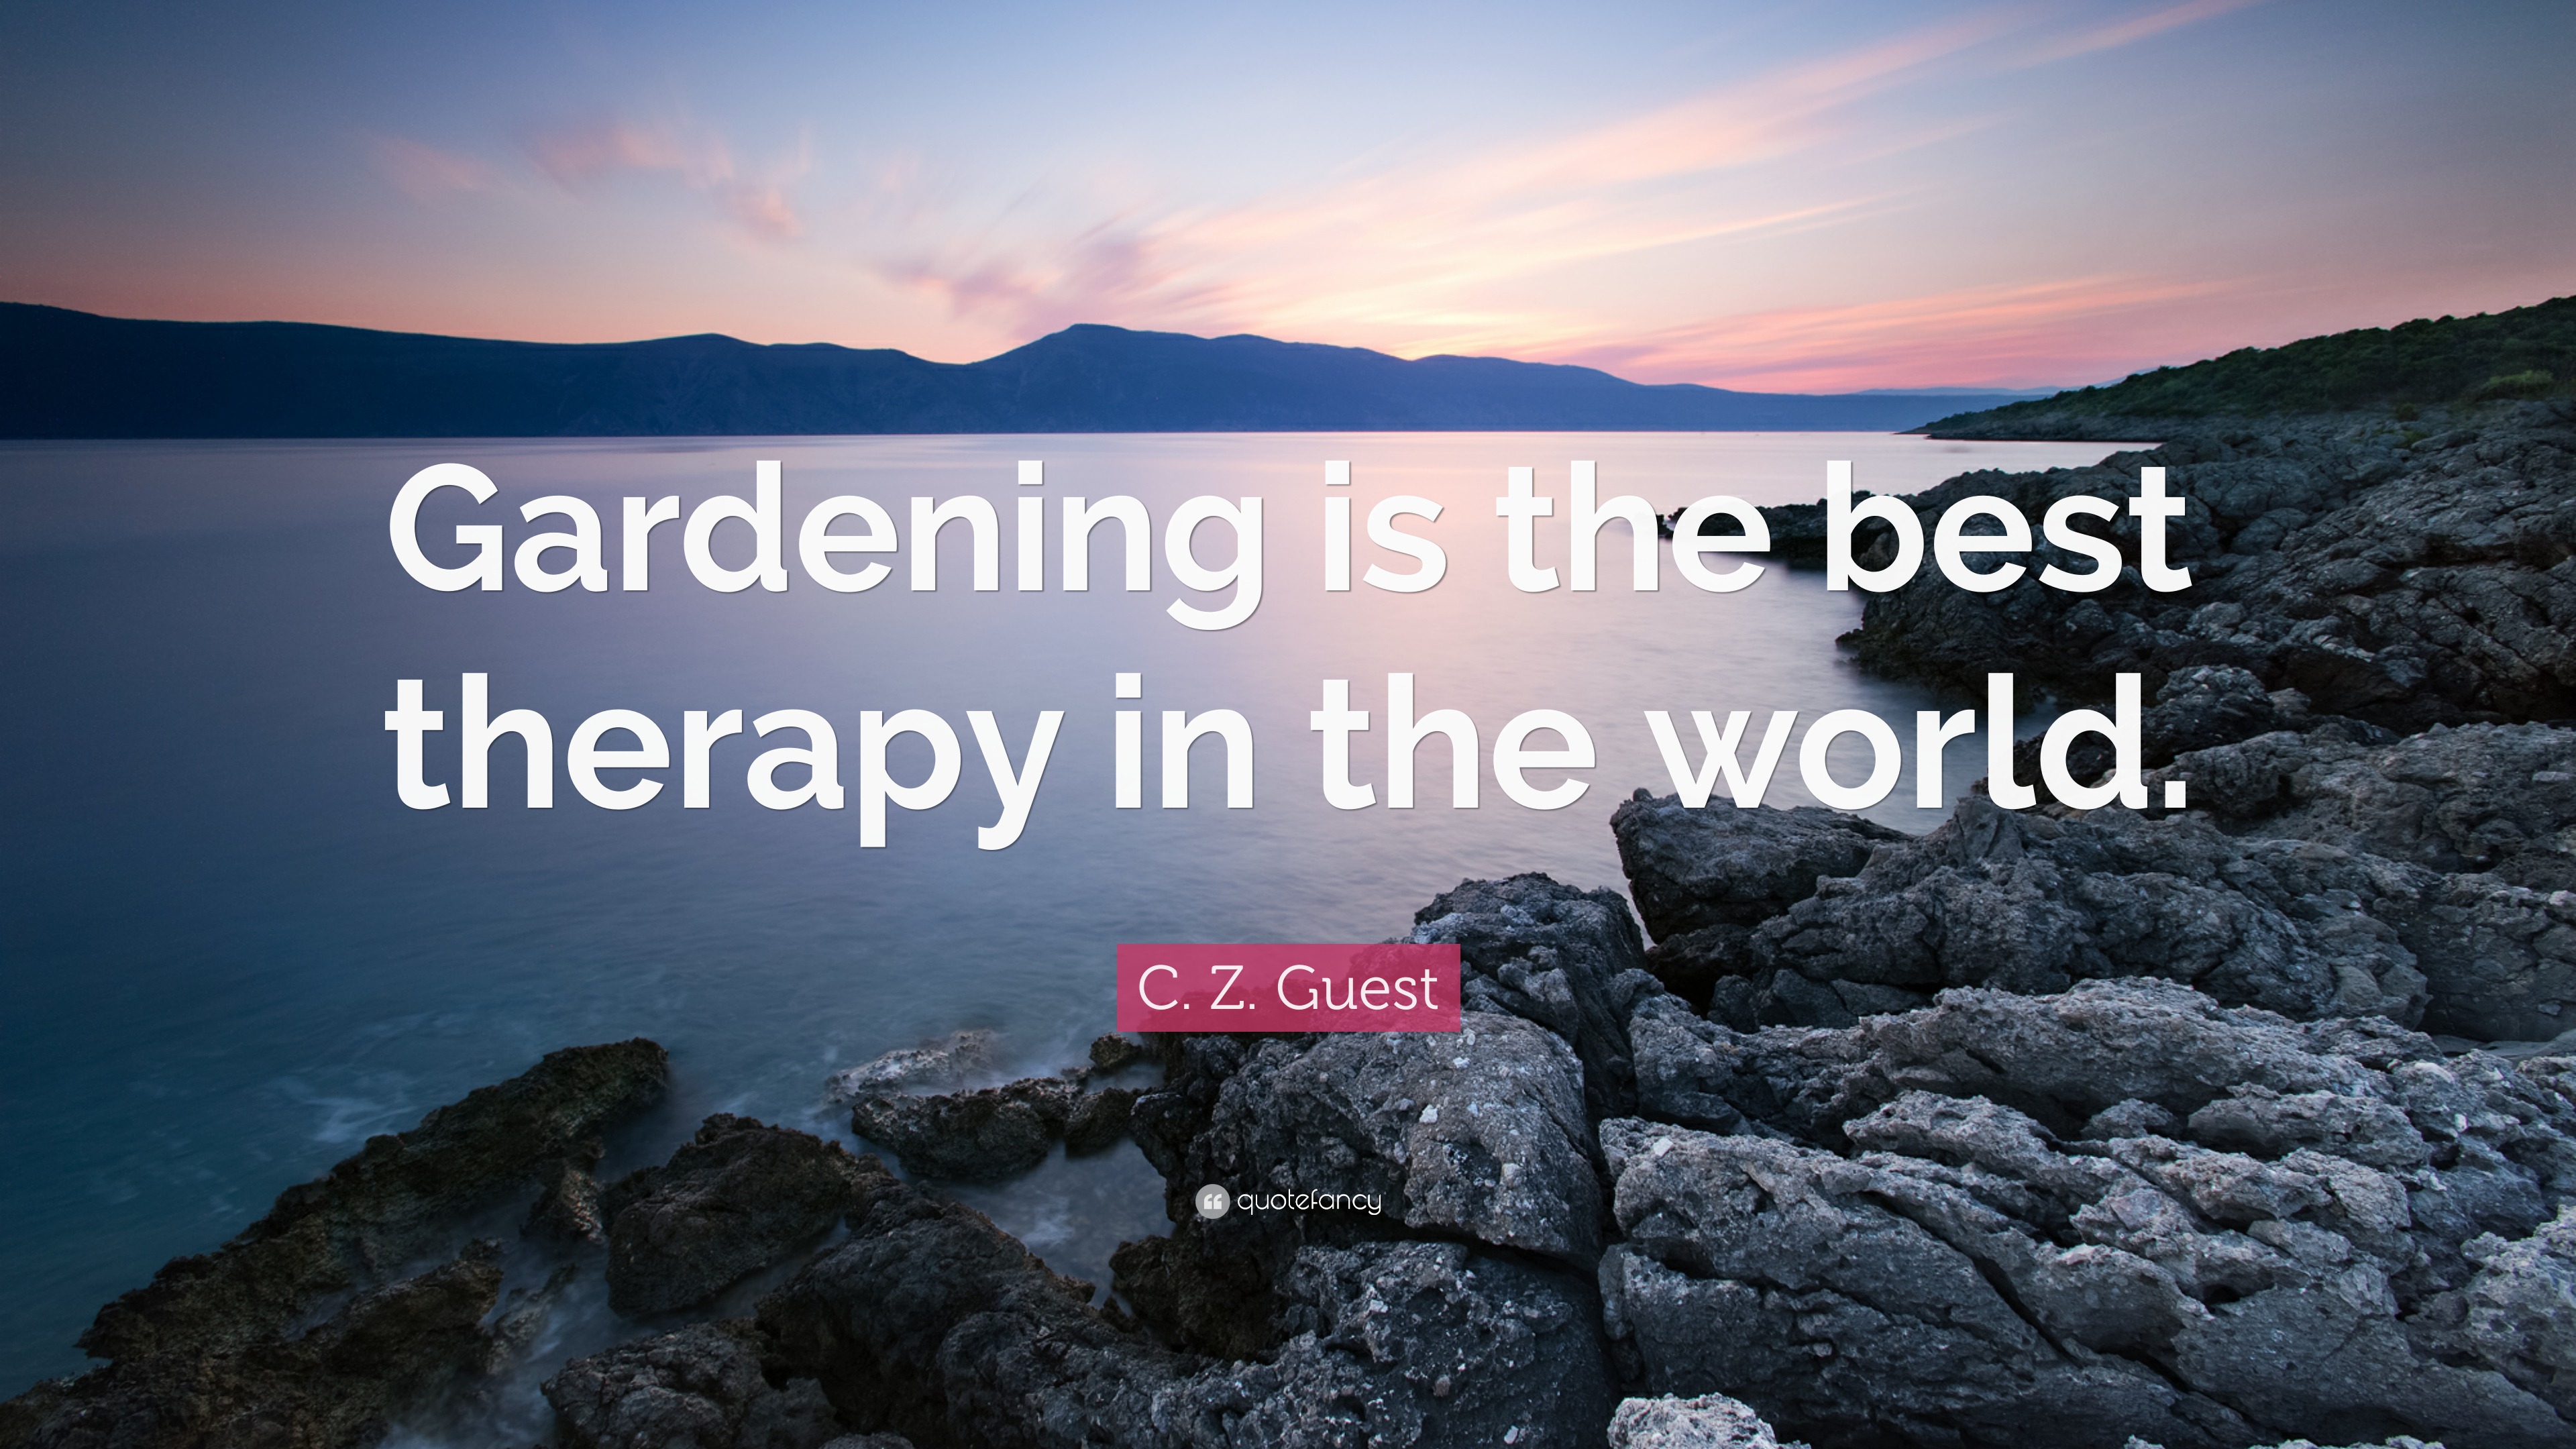 C Z Guest Quote Gardening Is The Best Therapy In The World Images, Photos, Reviews